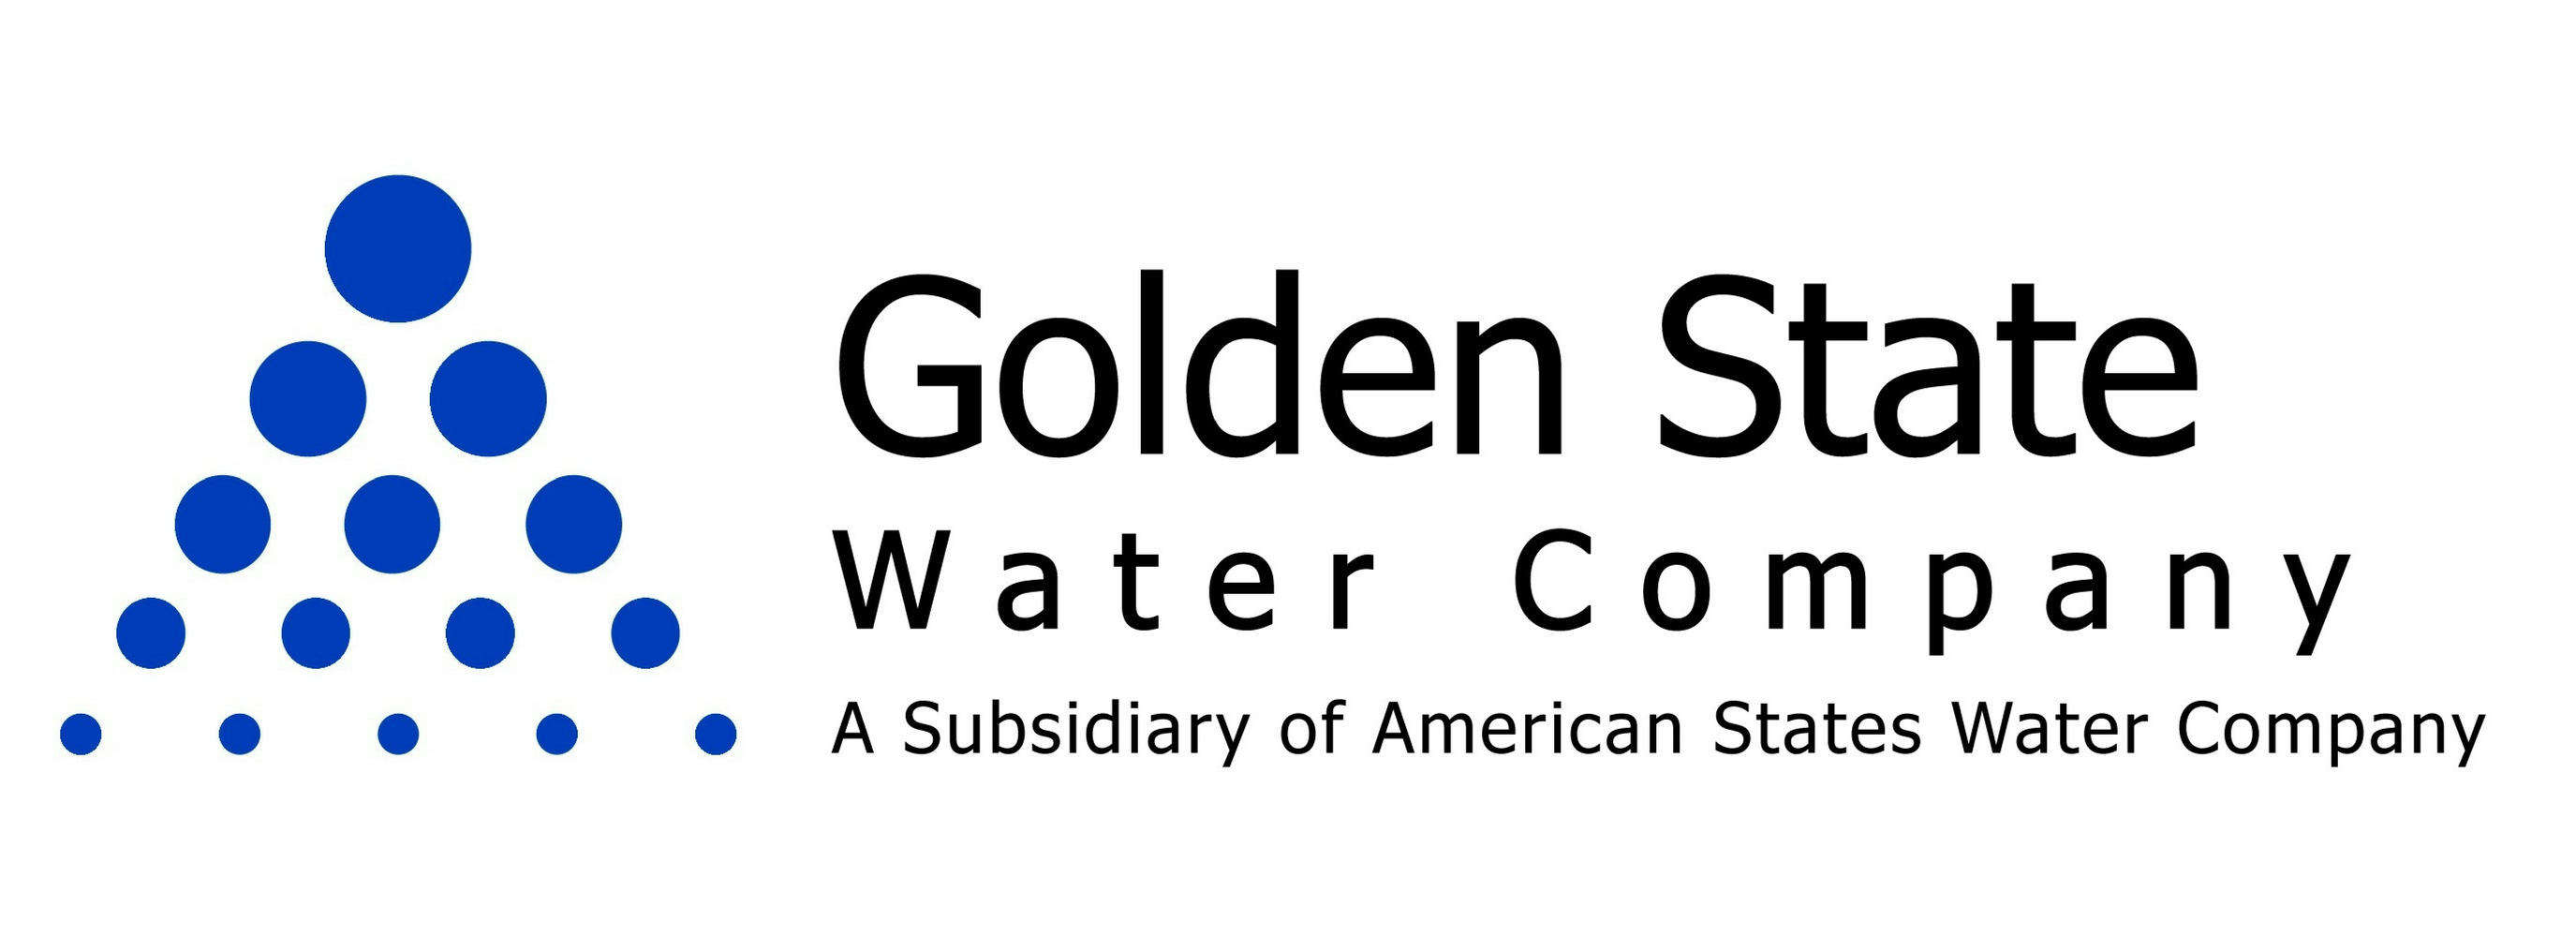 Golden State Water